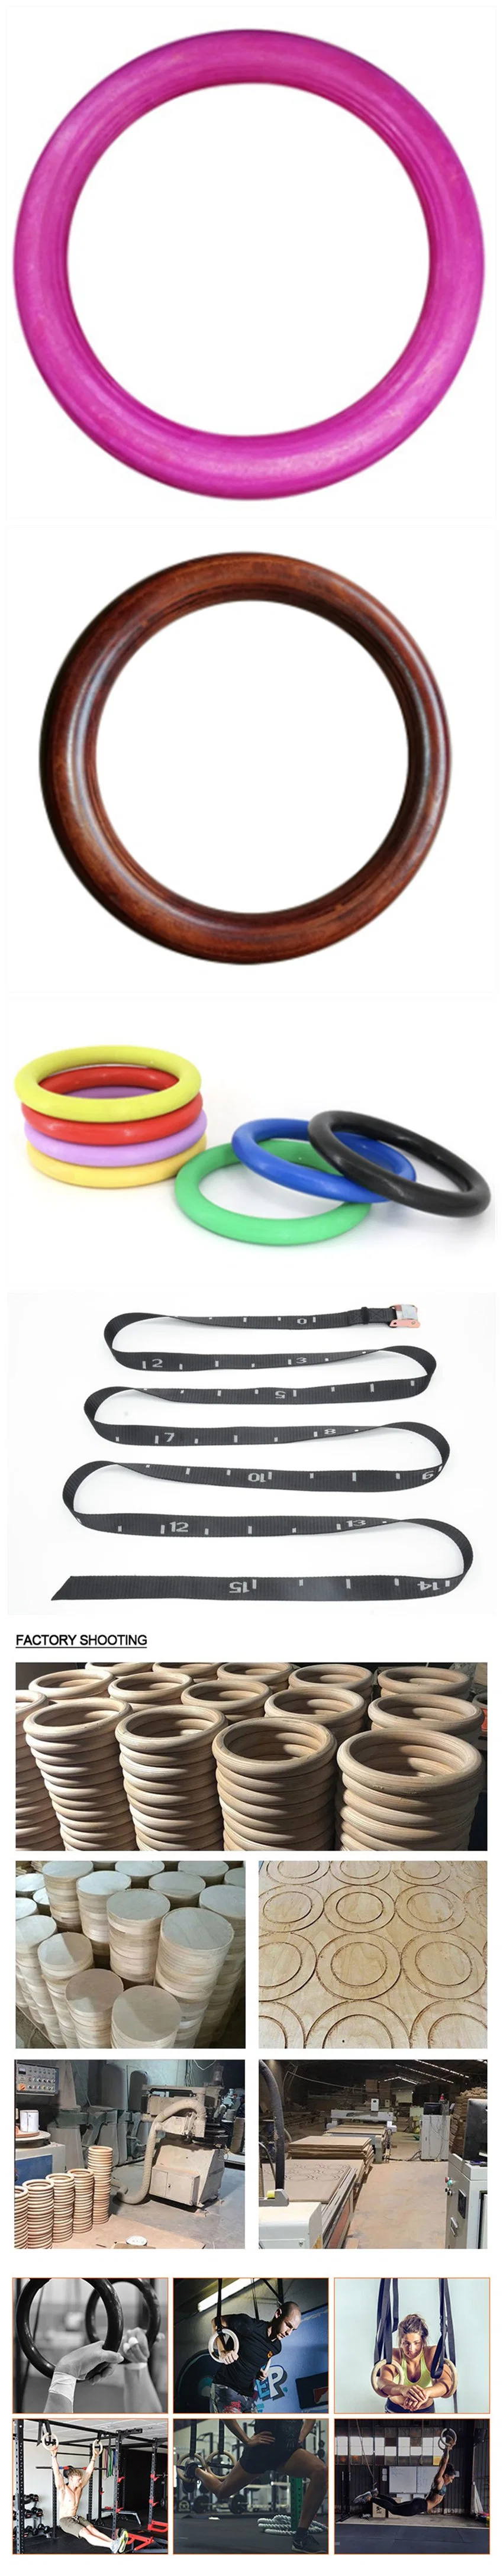 Wooden Gymnastic Rings Workout Power Training Adjustable Strap Core 38mm Sports Ring Strength Exercise Gymnastic Fitness Nylon Strap Wooden Gym Rings